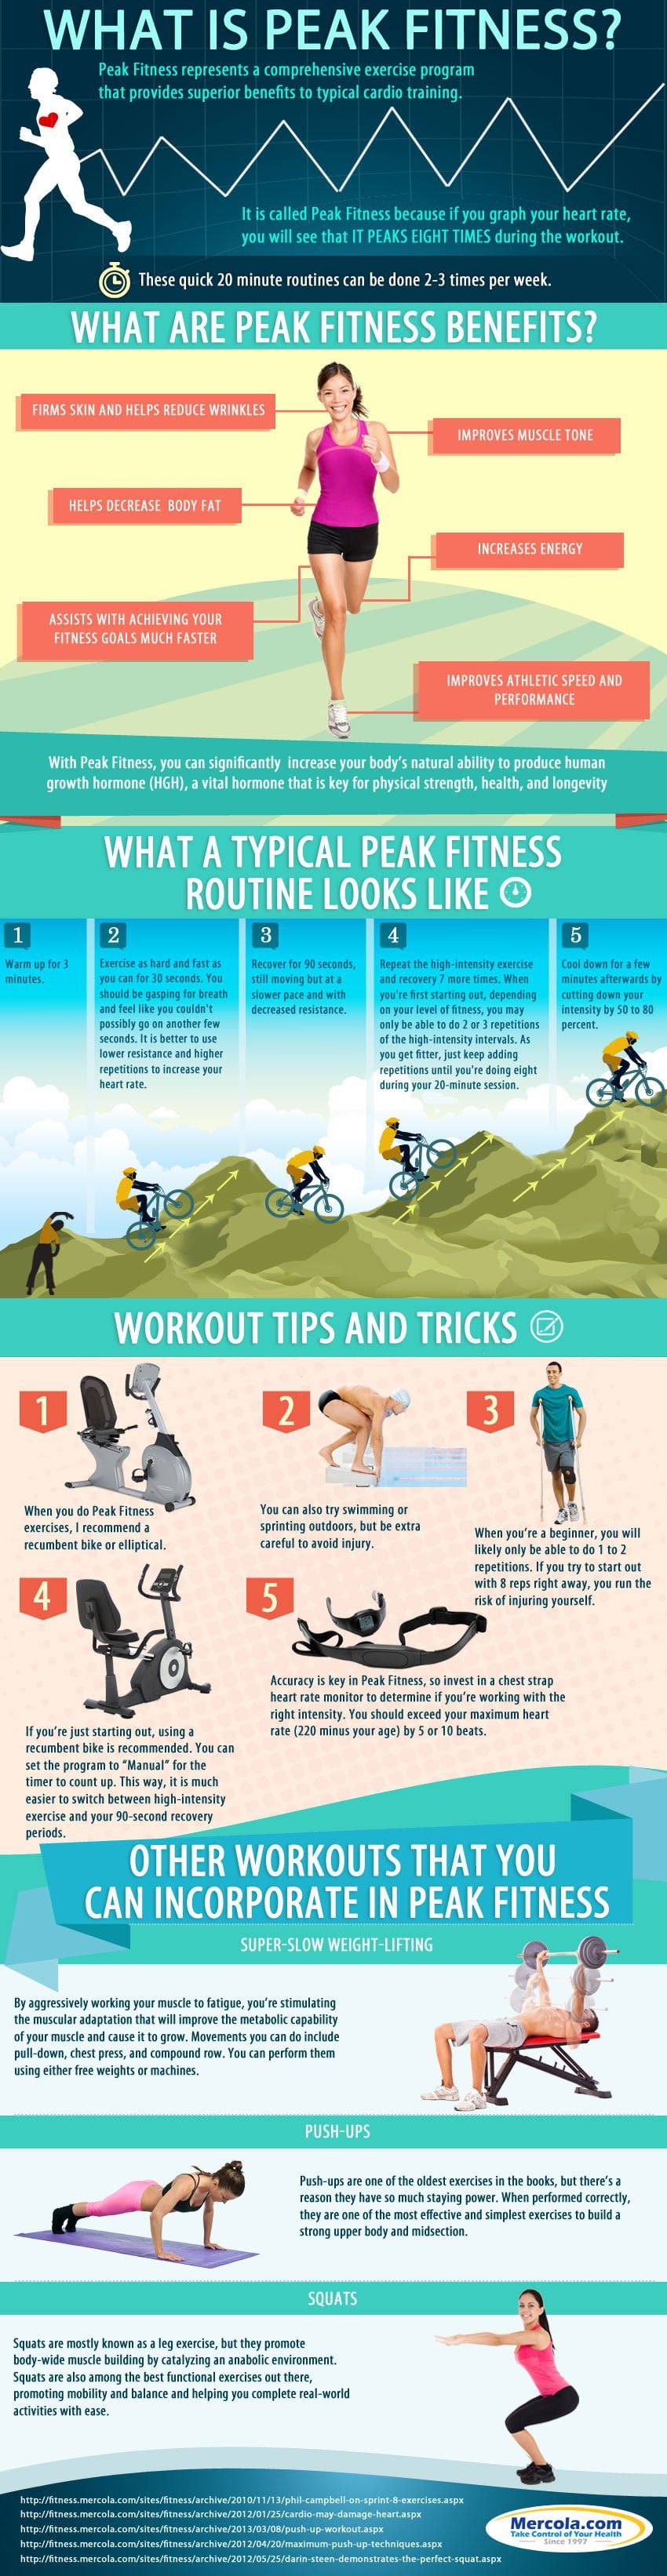 What Is Peak Fitness Infographic